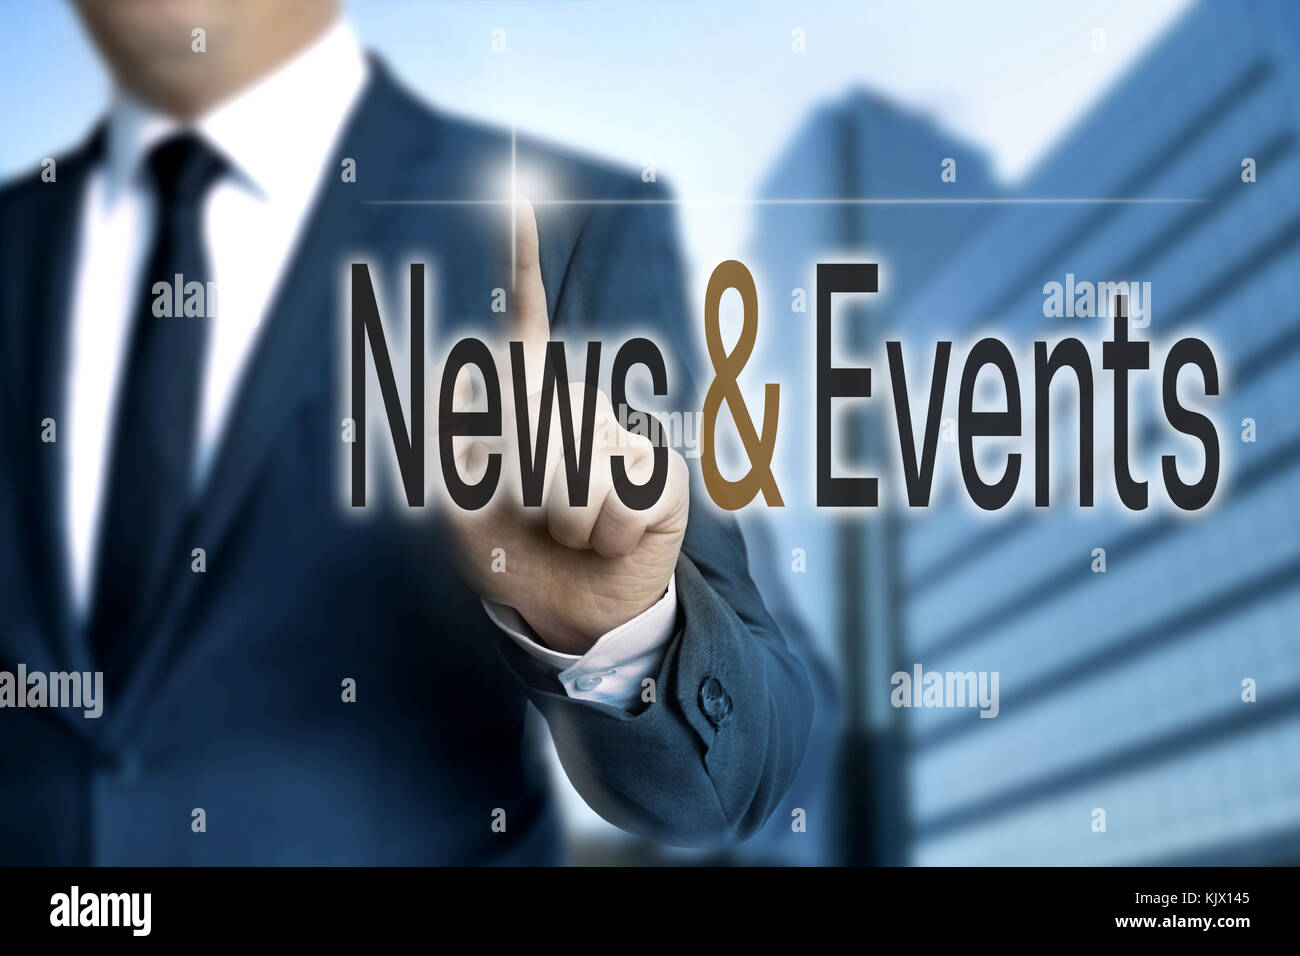 News and Events touchscreen is operated by businessman. Stock Photo